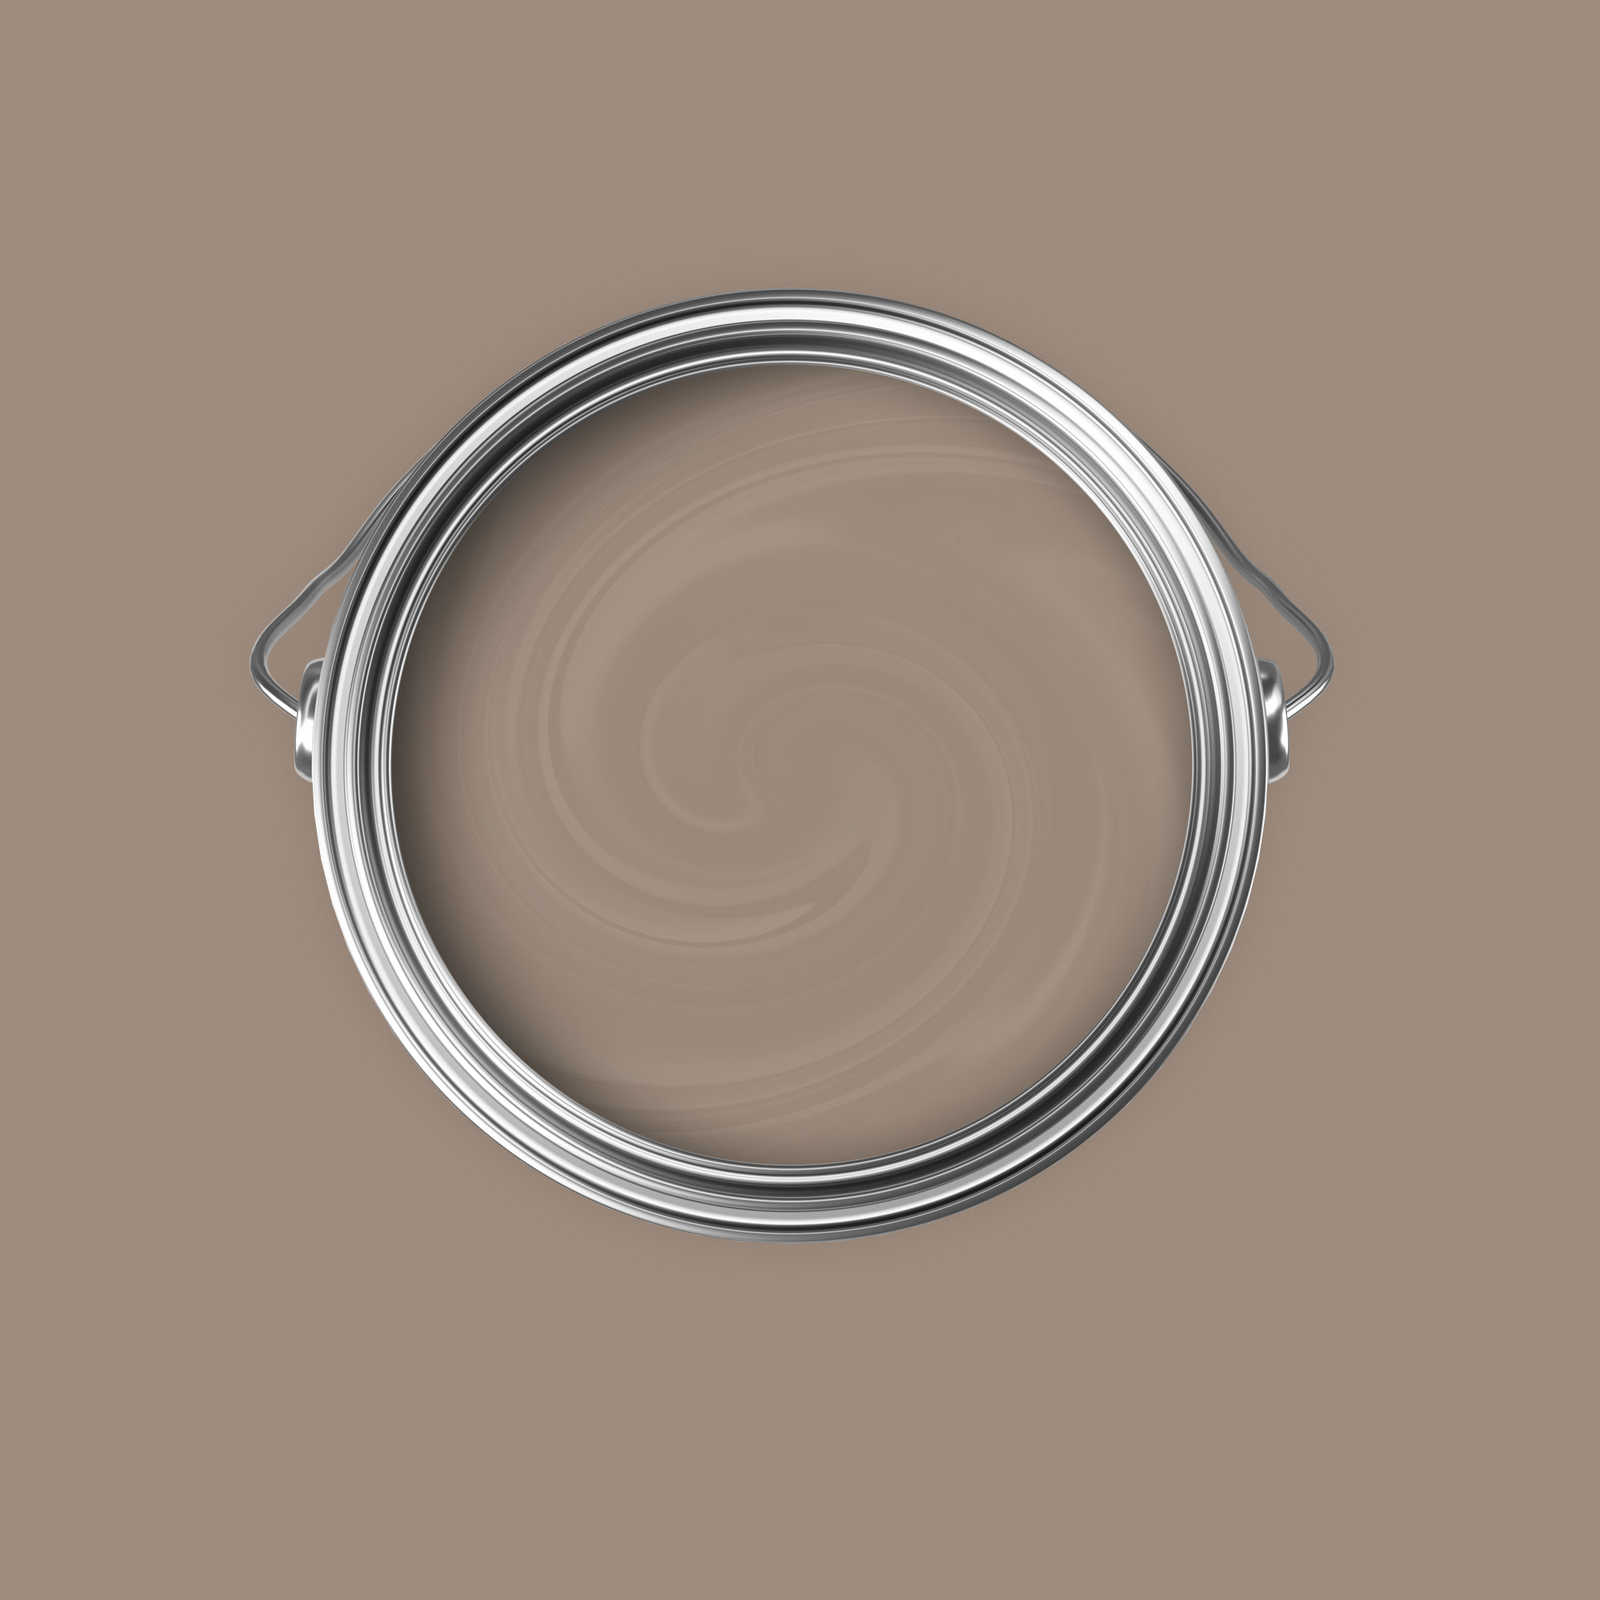             Pittura murale Premium Down-to-earth Taupe »Talented calm taupe« NW702 – 5 litri
        